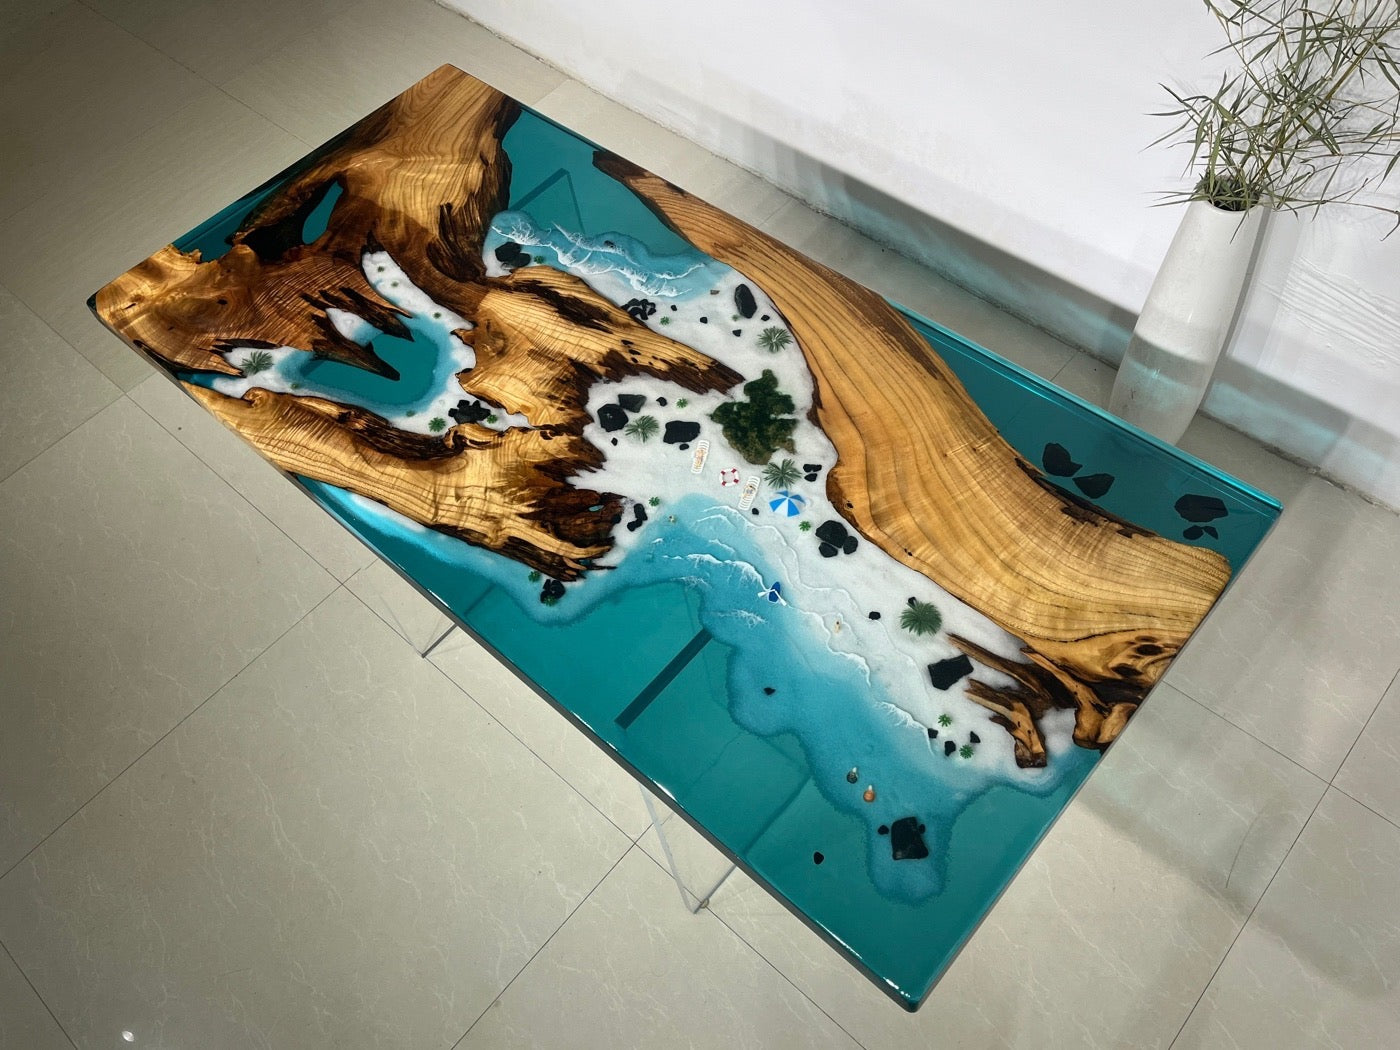 Epoxy Resin High Quality Table In Australia, High Quality Epoxy Resin Table